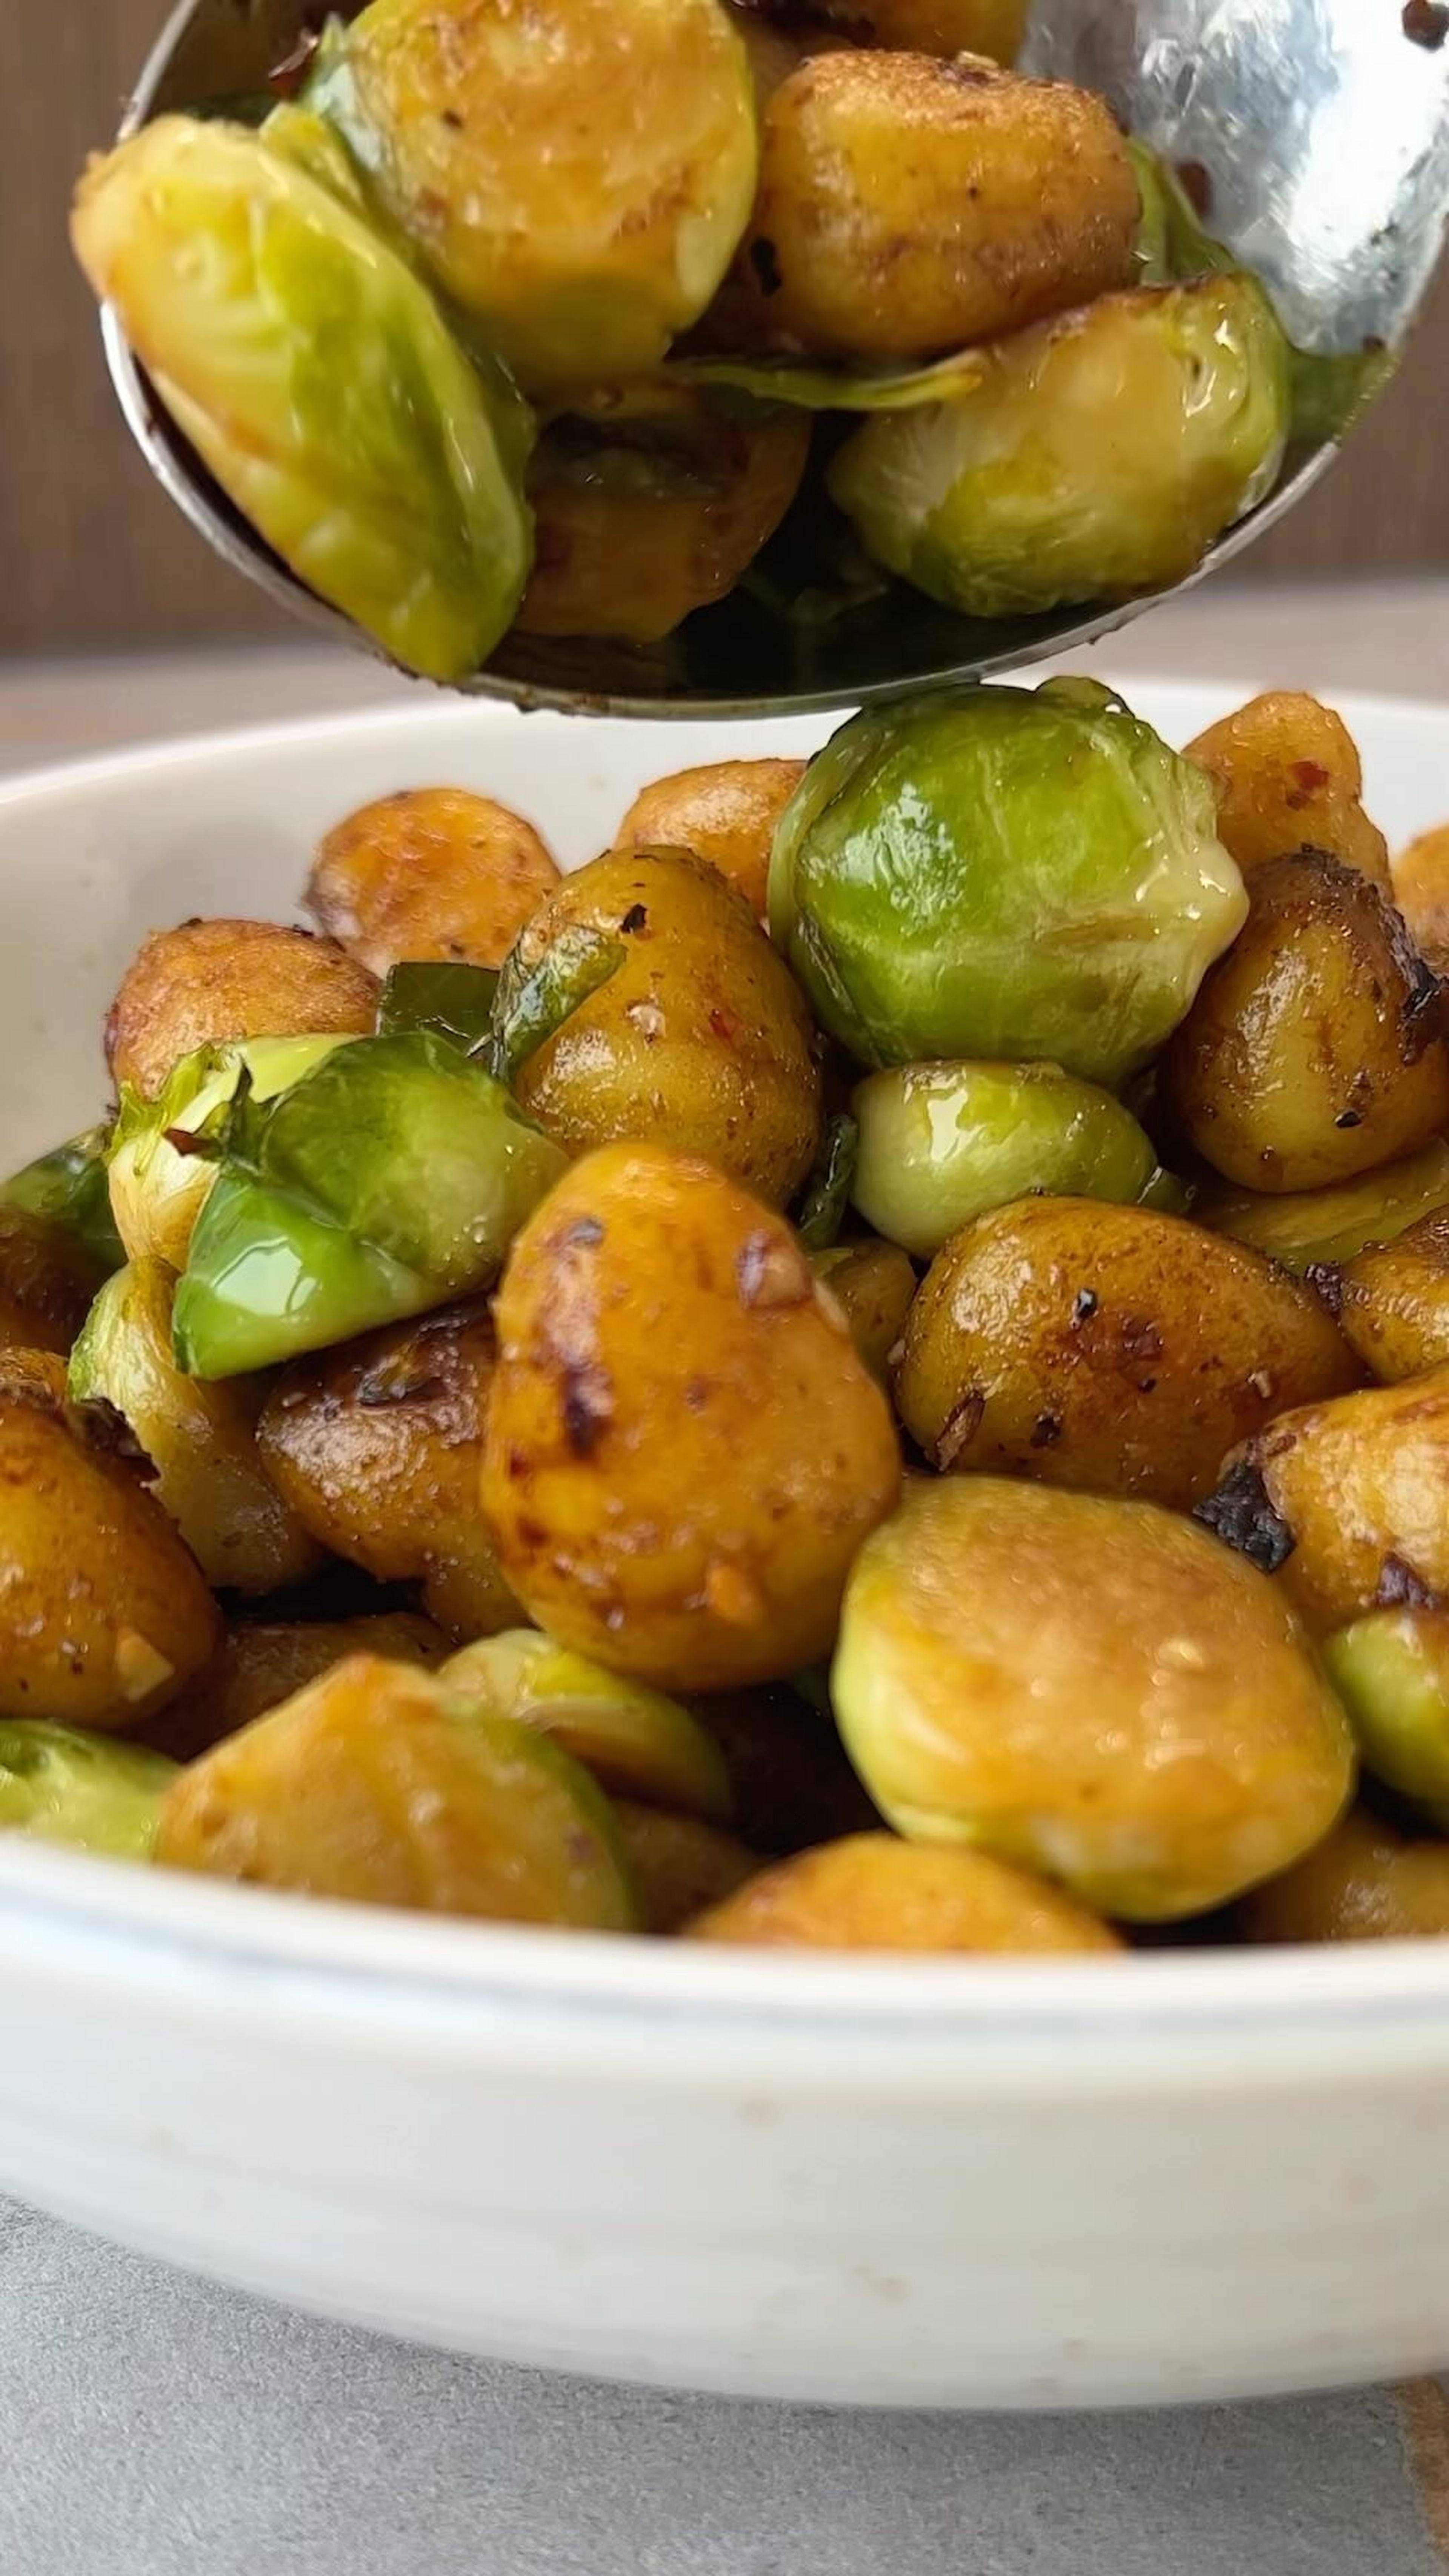 Crispy pan-fried gnocchi with Brussels sprouts